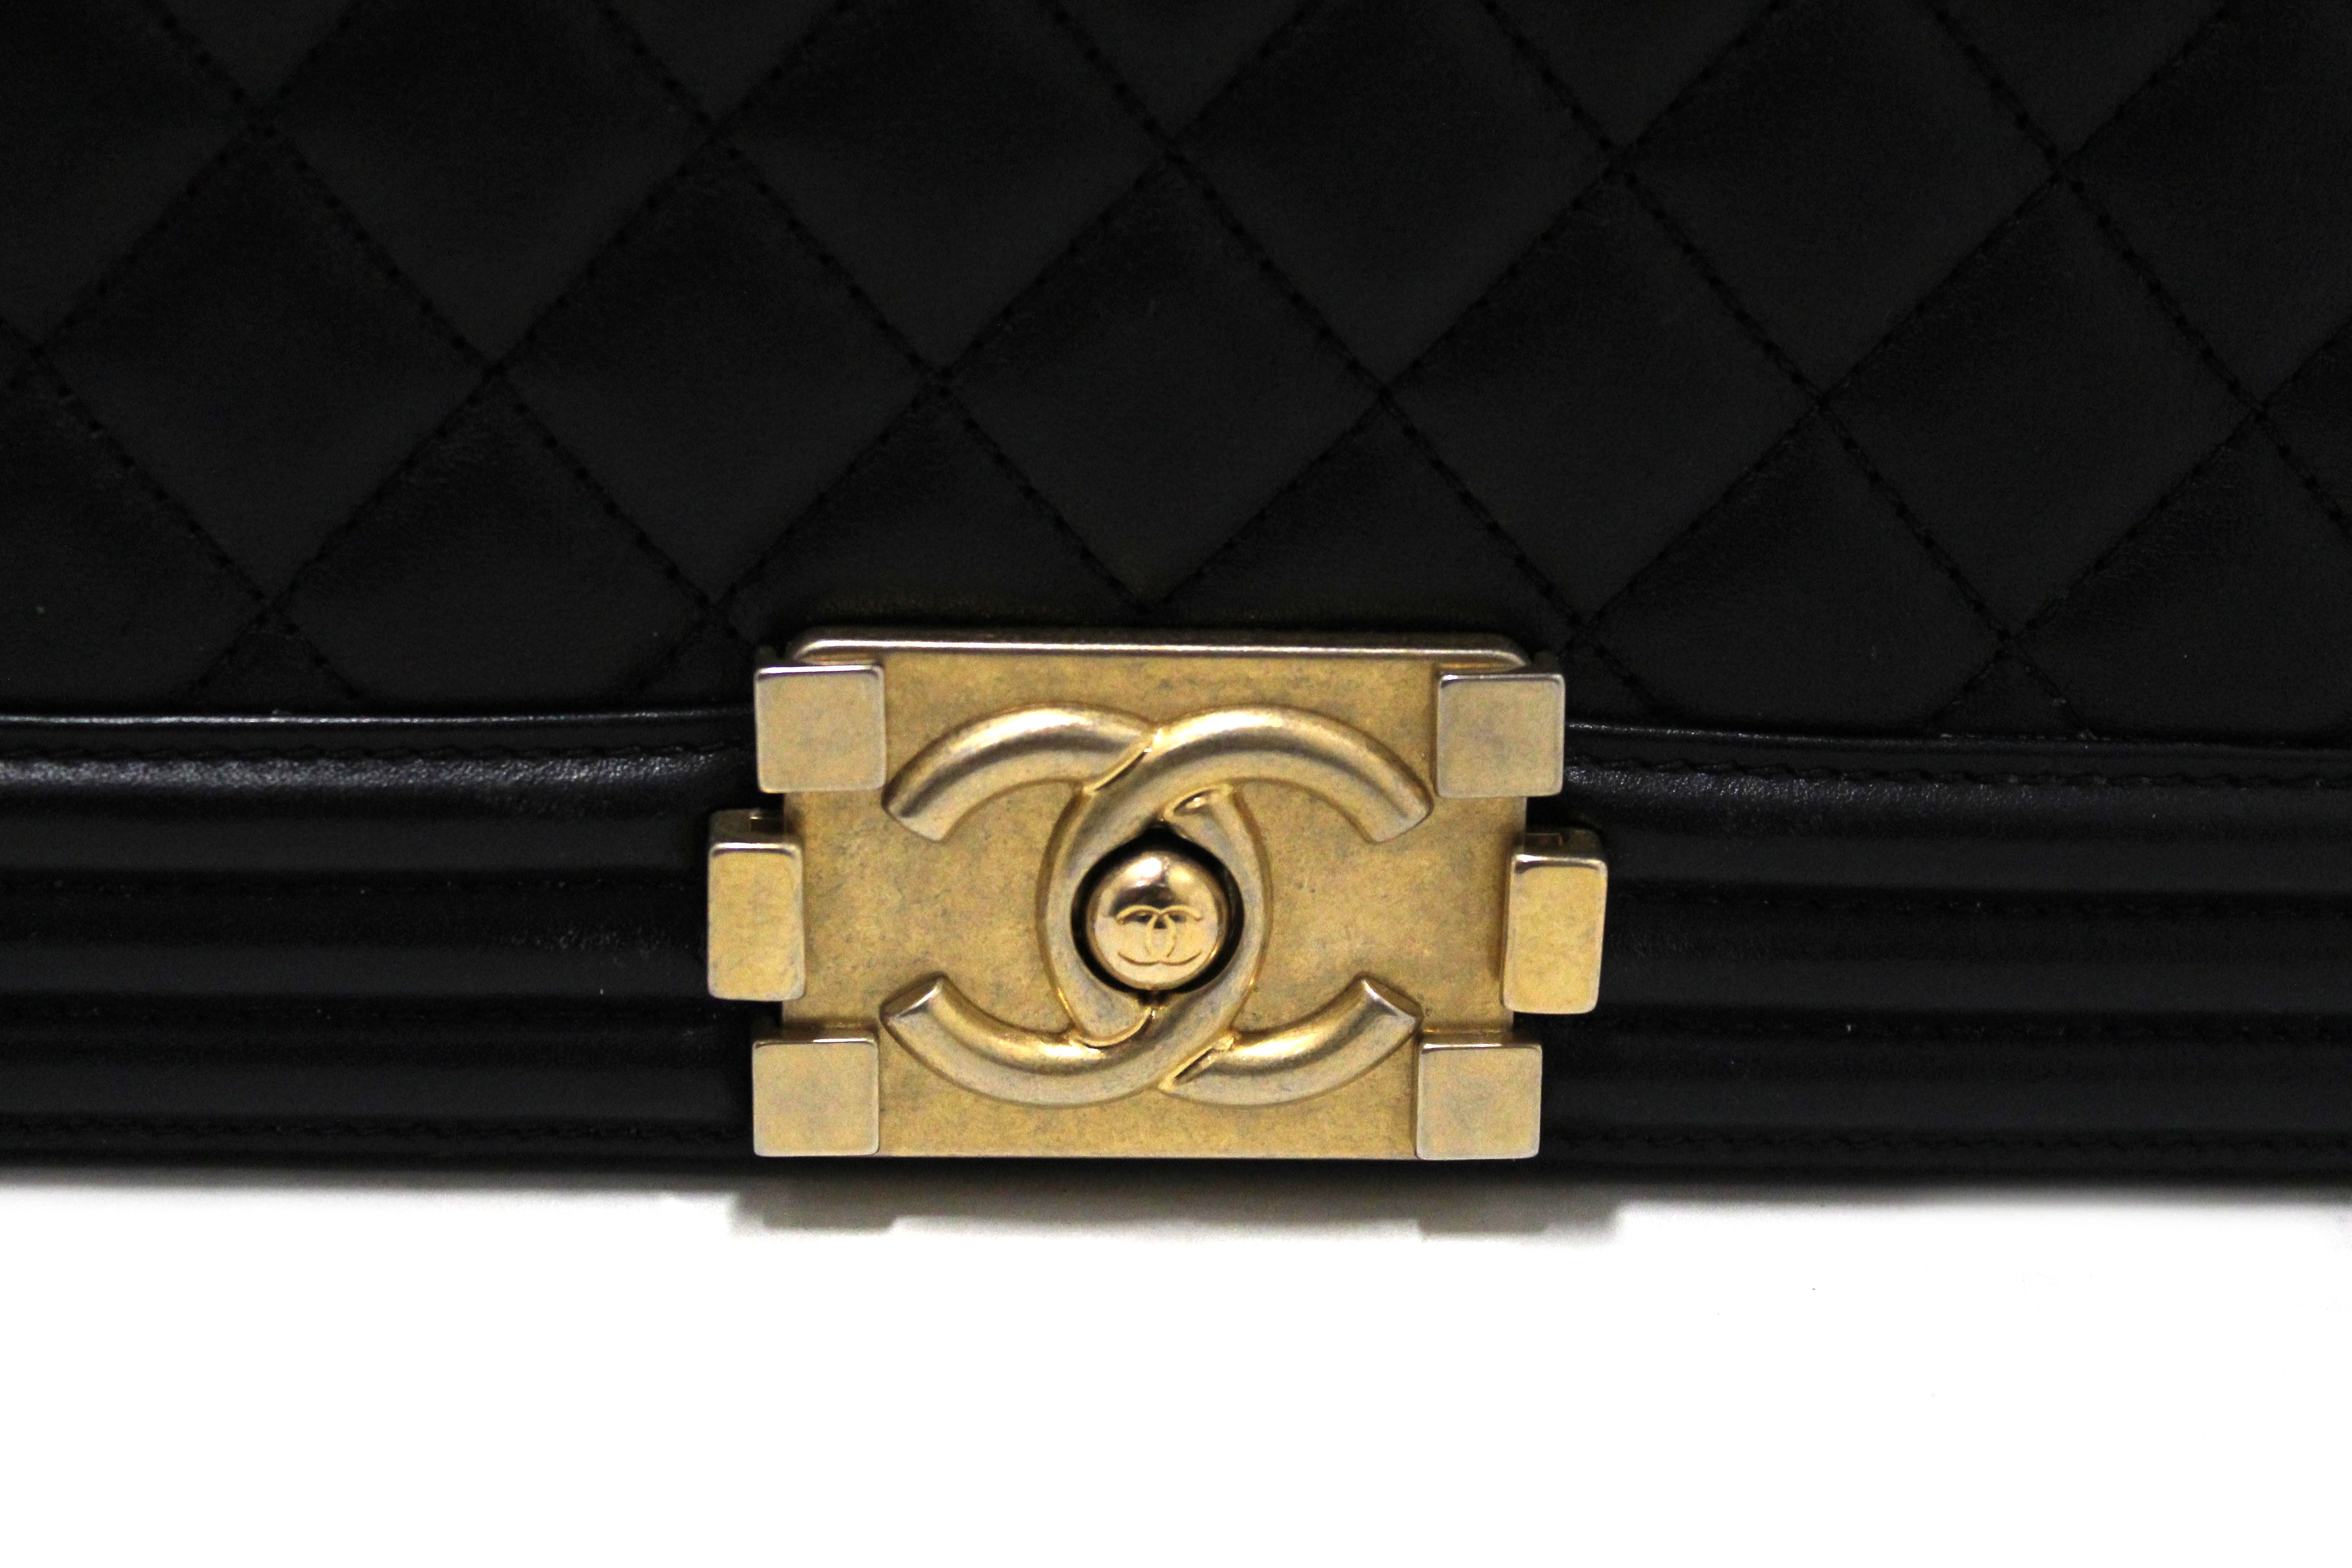 Authentic Chanel Black Quilted Lambskin Leather Medium Boy Shoulder Bag